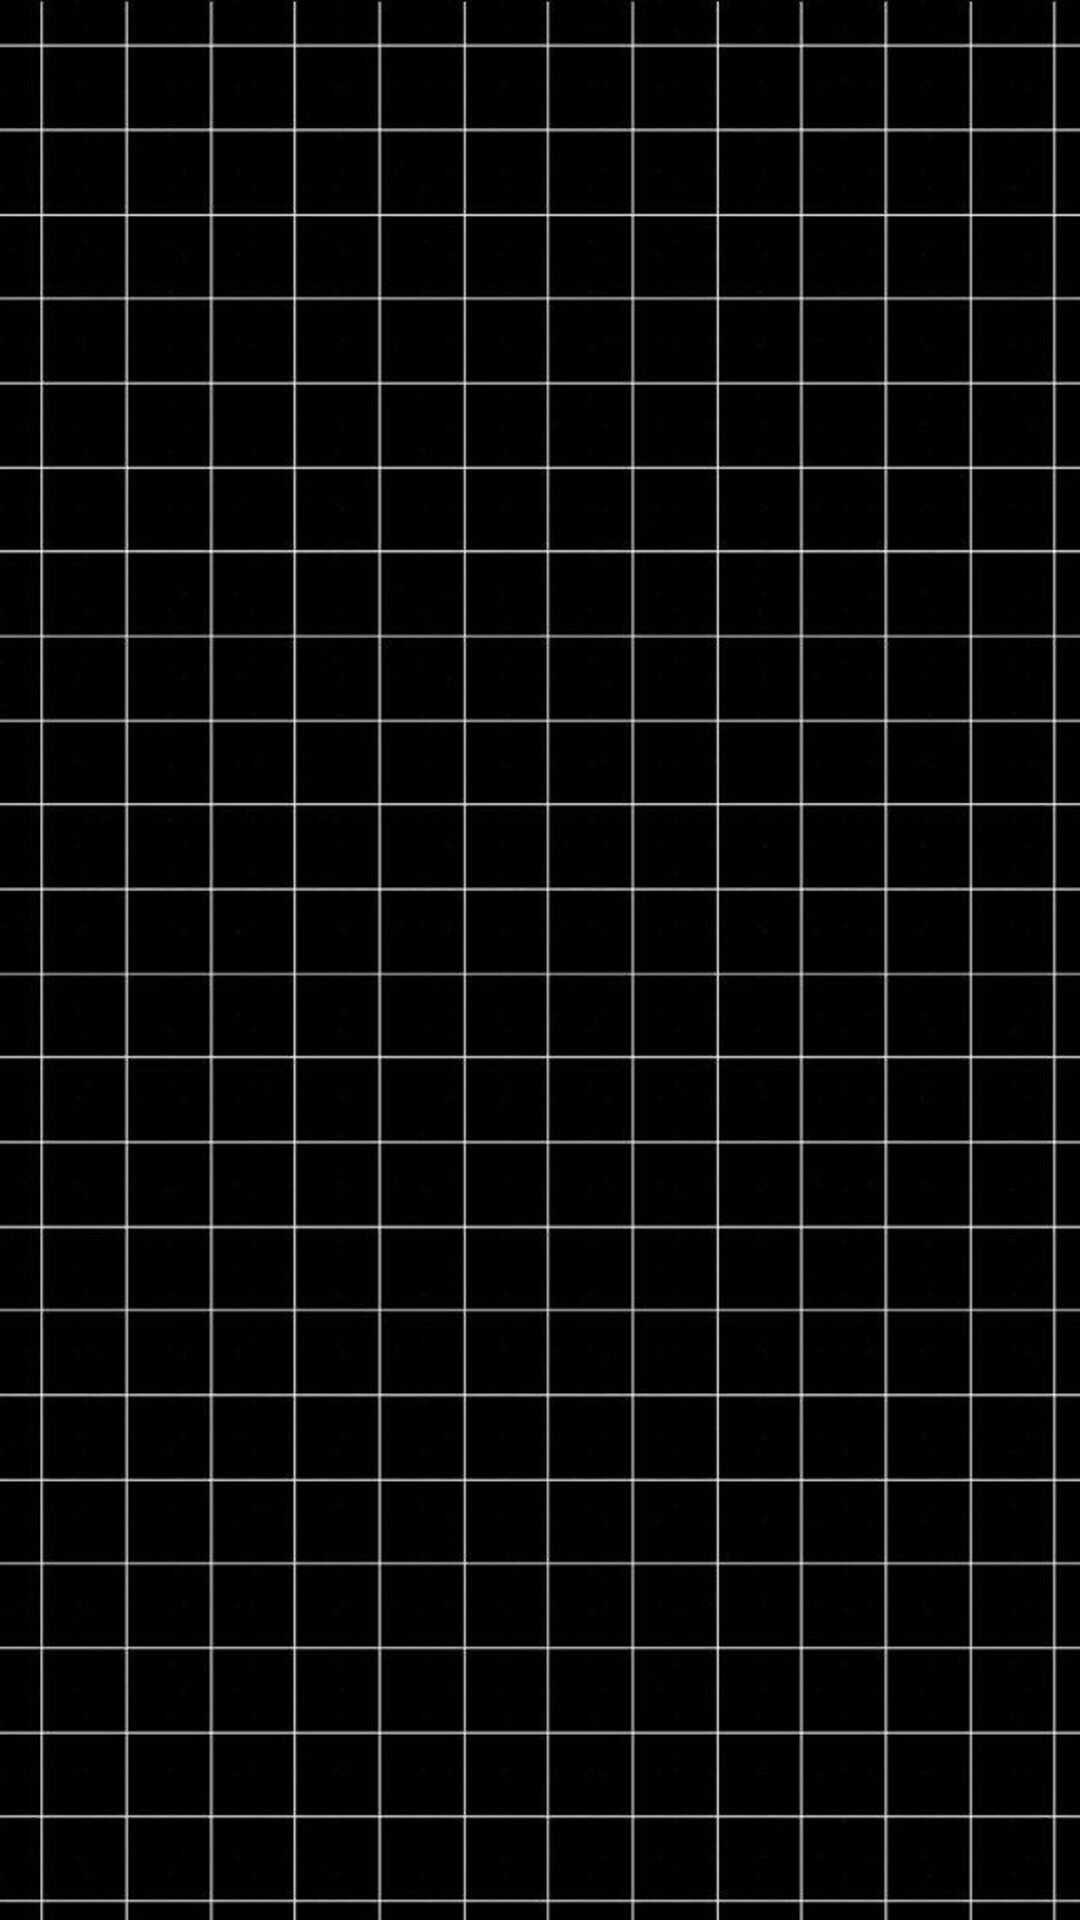 iPhone Grid Wallpaper - KoLPaPer - Awesome Free HD Wallpapers